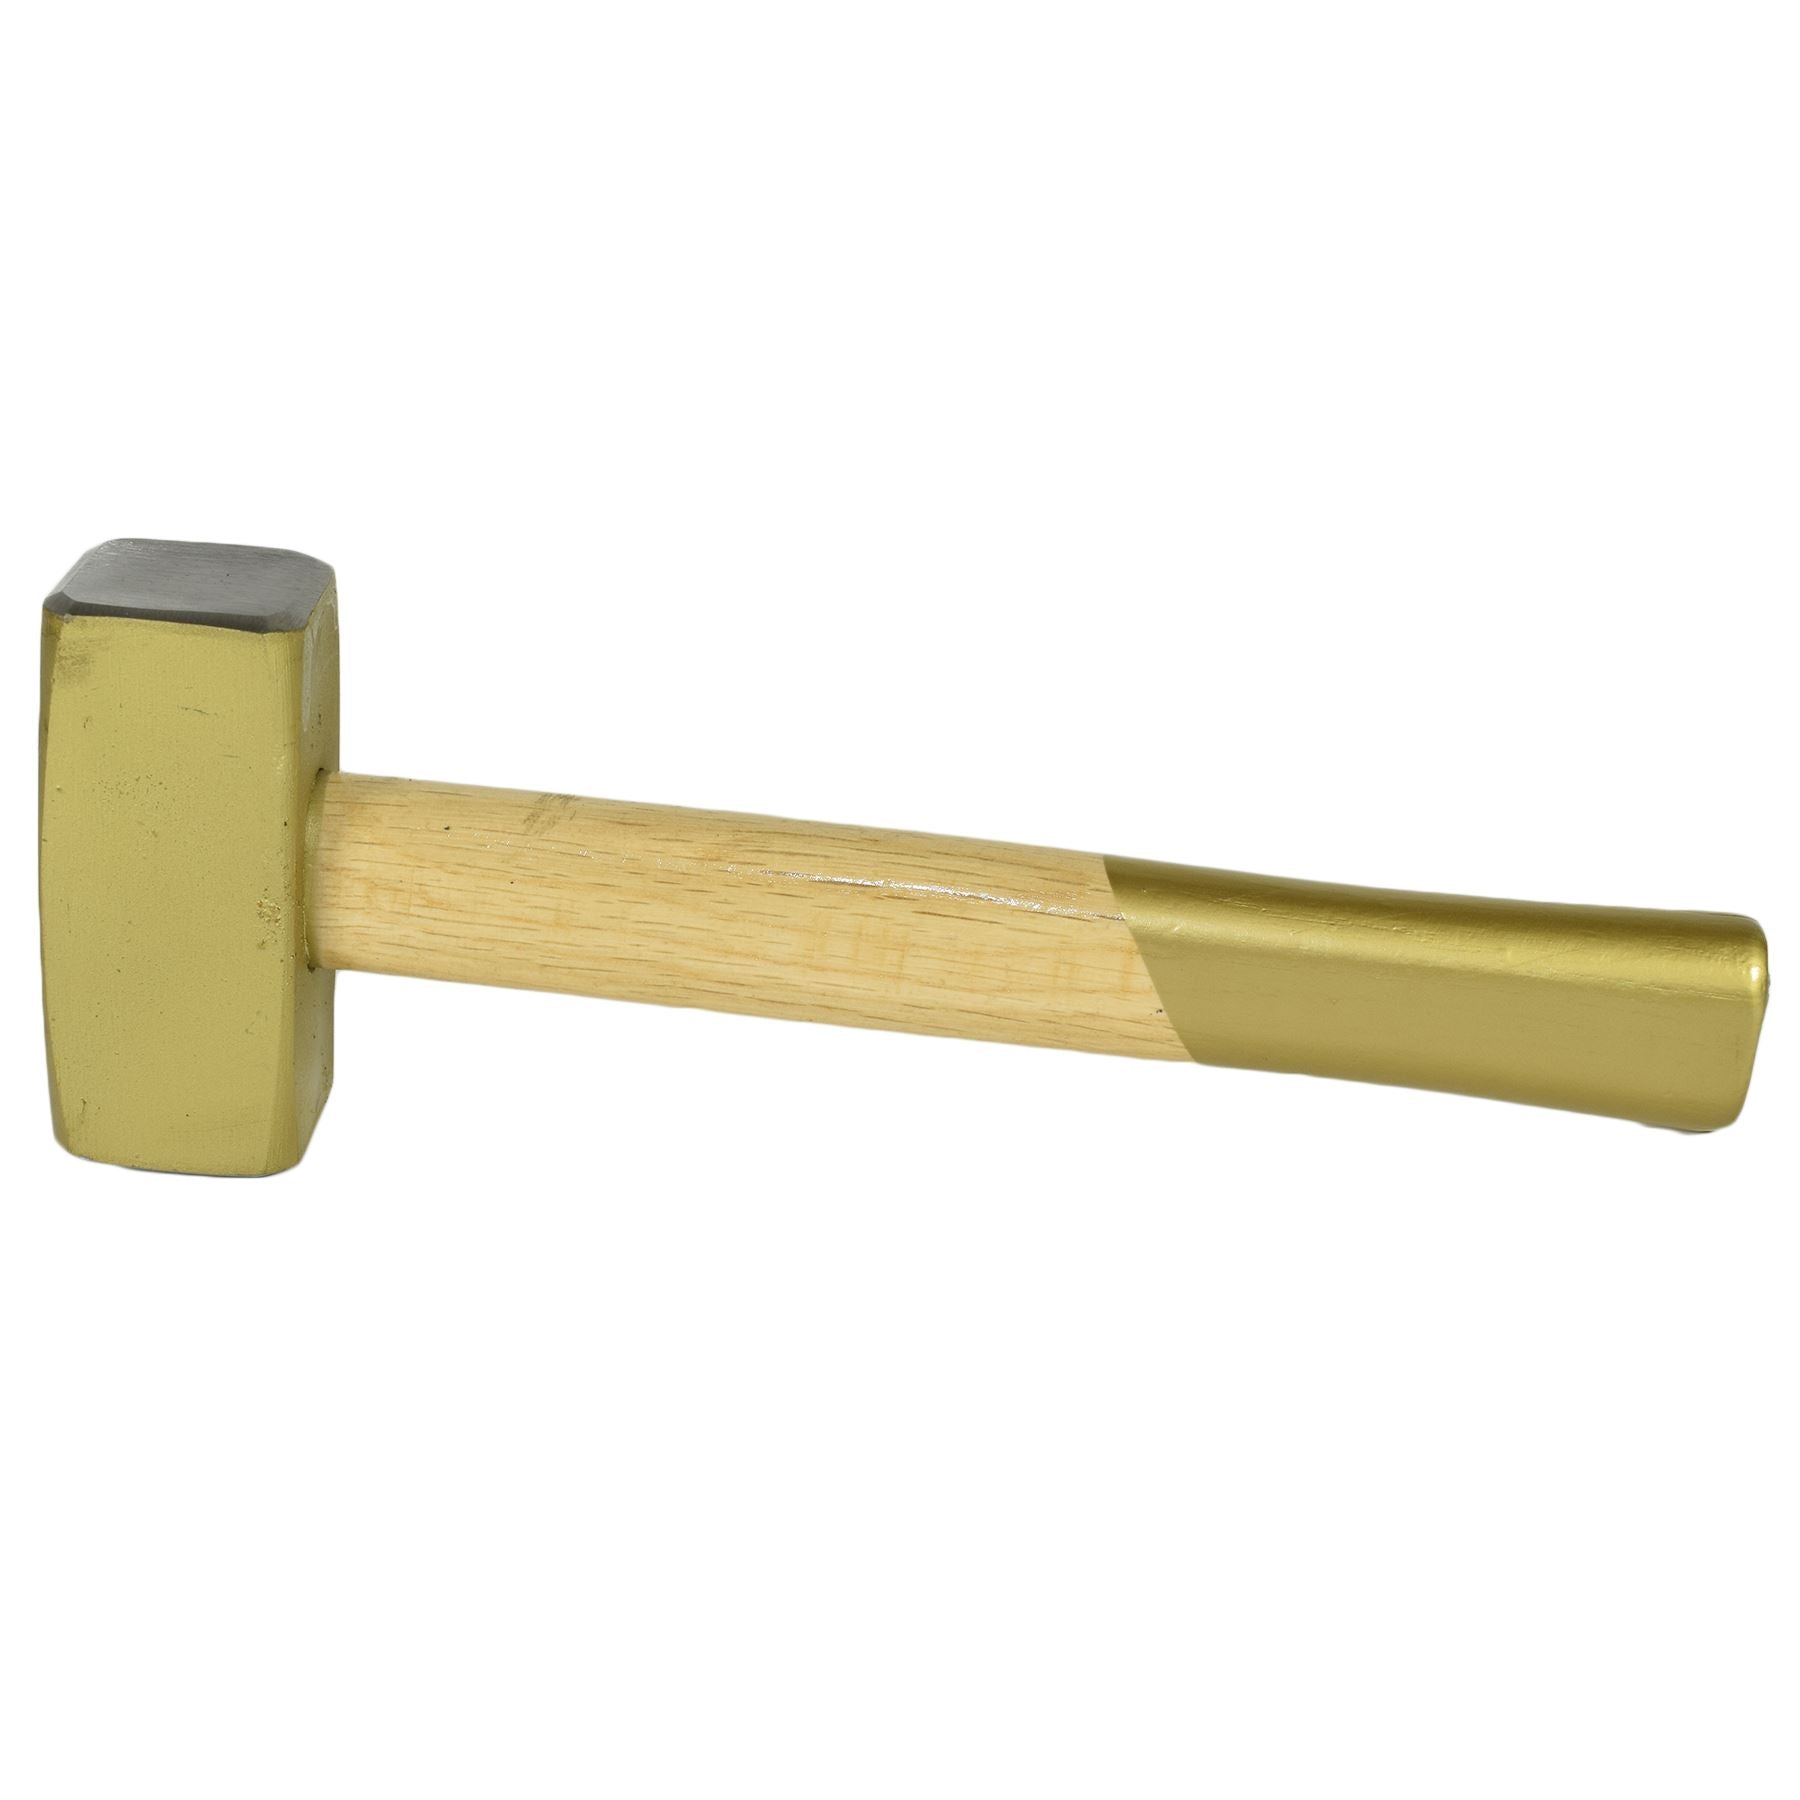 1 KG Double Face Sledge / Lump Hammer Wooden Handle Shaft 2.2lbs